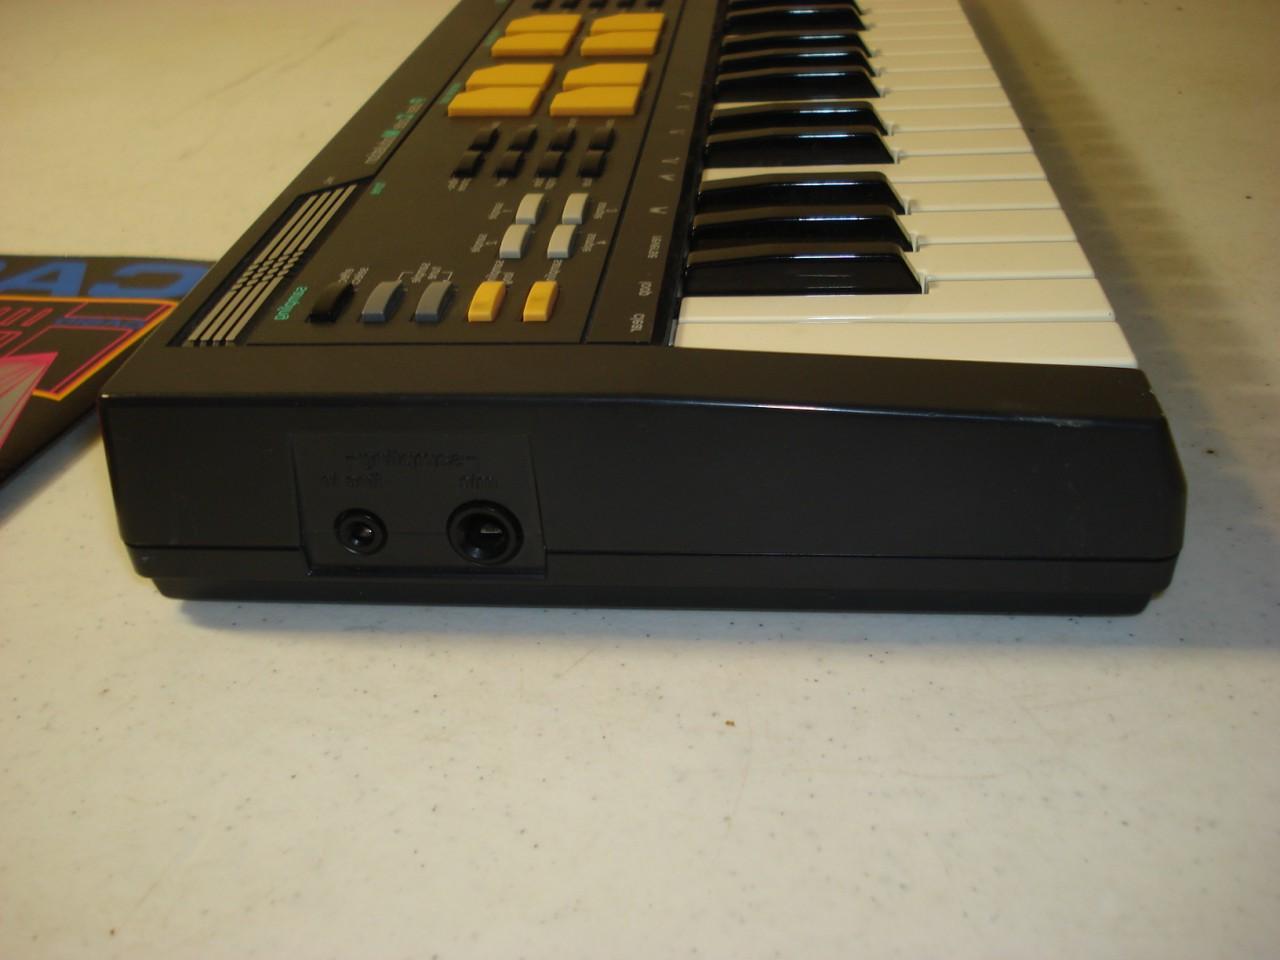 Casio SK-5 Sampling Keyboard PCM Synthesizer with Manual